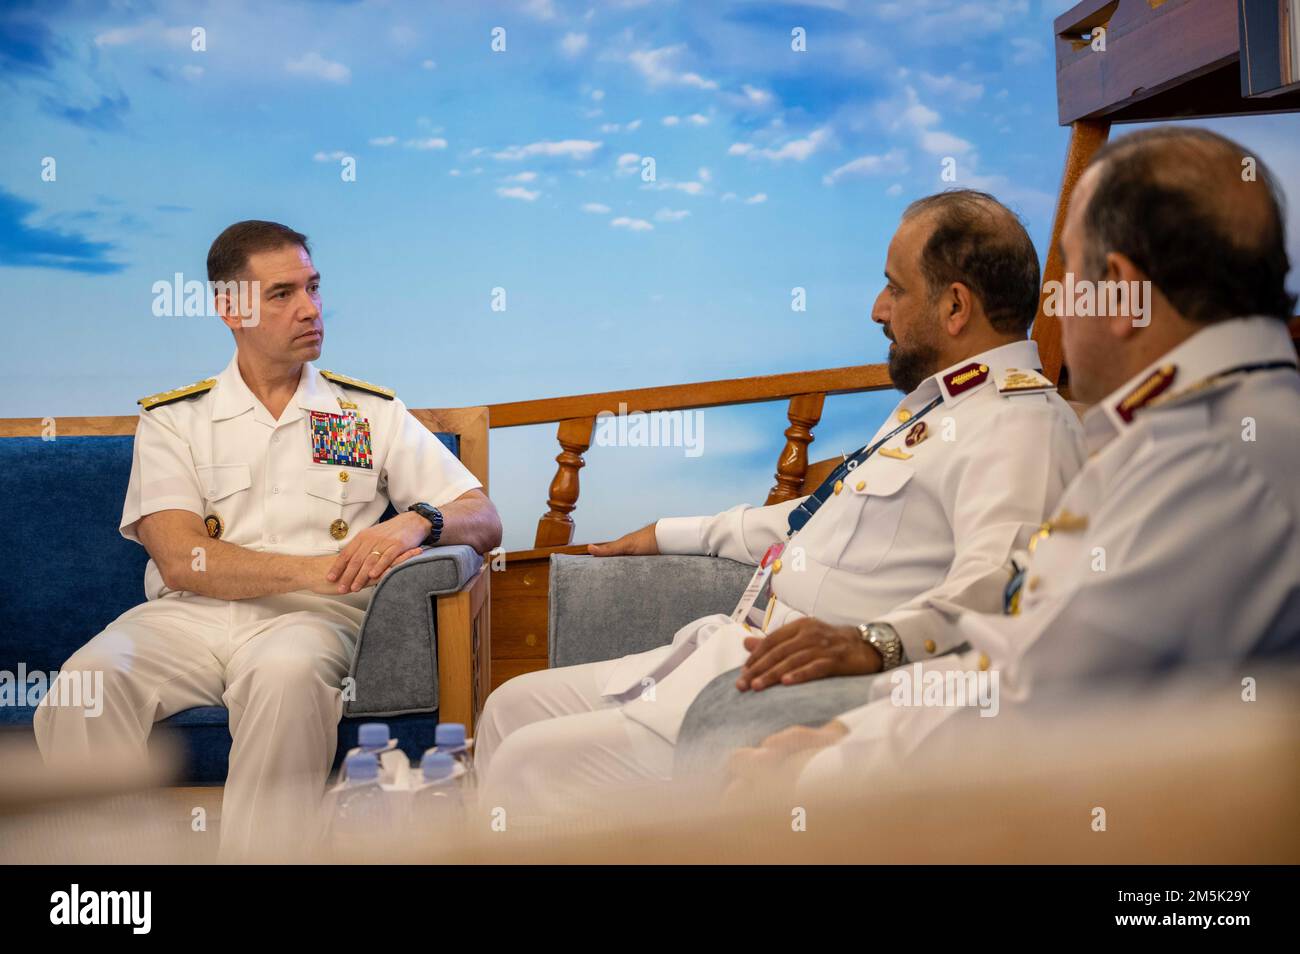 220321-N-OC333-1063 DOHA, Qatar (March 21, 2022) Vice Adm. Brad Cooper, commander of U.S. Naval Forces Central Command, U.S. 5th Fleet and Combined Maritime Forces, speaks to Maj. Gen. Abdullah Hassan Al-Sulaiti, commander of the Qatari Emiri Naval Forces, at the Doha International Maritime Defence Exhibition and Conference in Doha, Qatar, March 21. Cooper met with several military leaders at the event and discussed strengthening regional maritime partnerships. Stock Photo